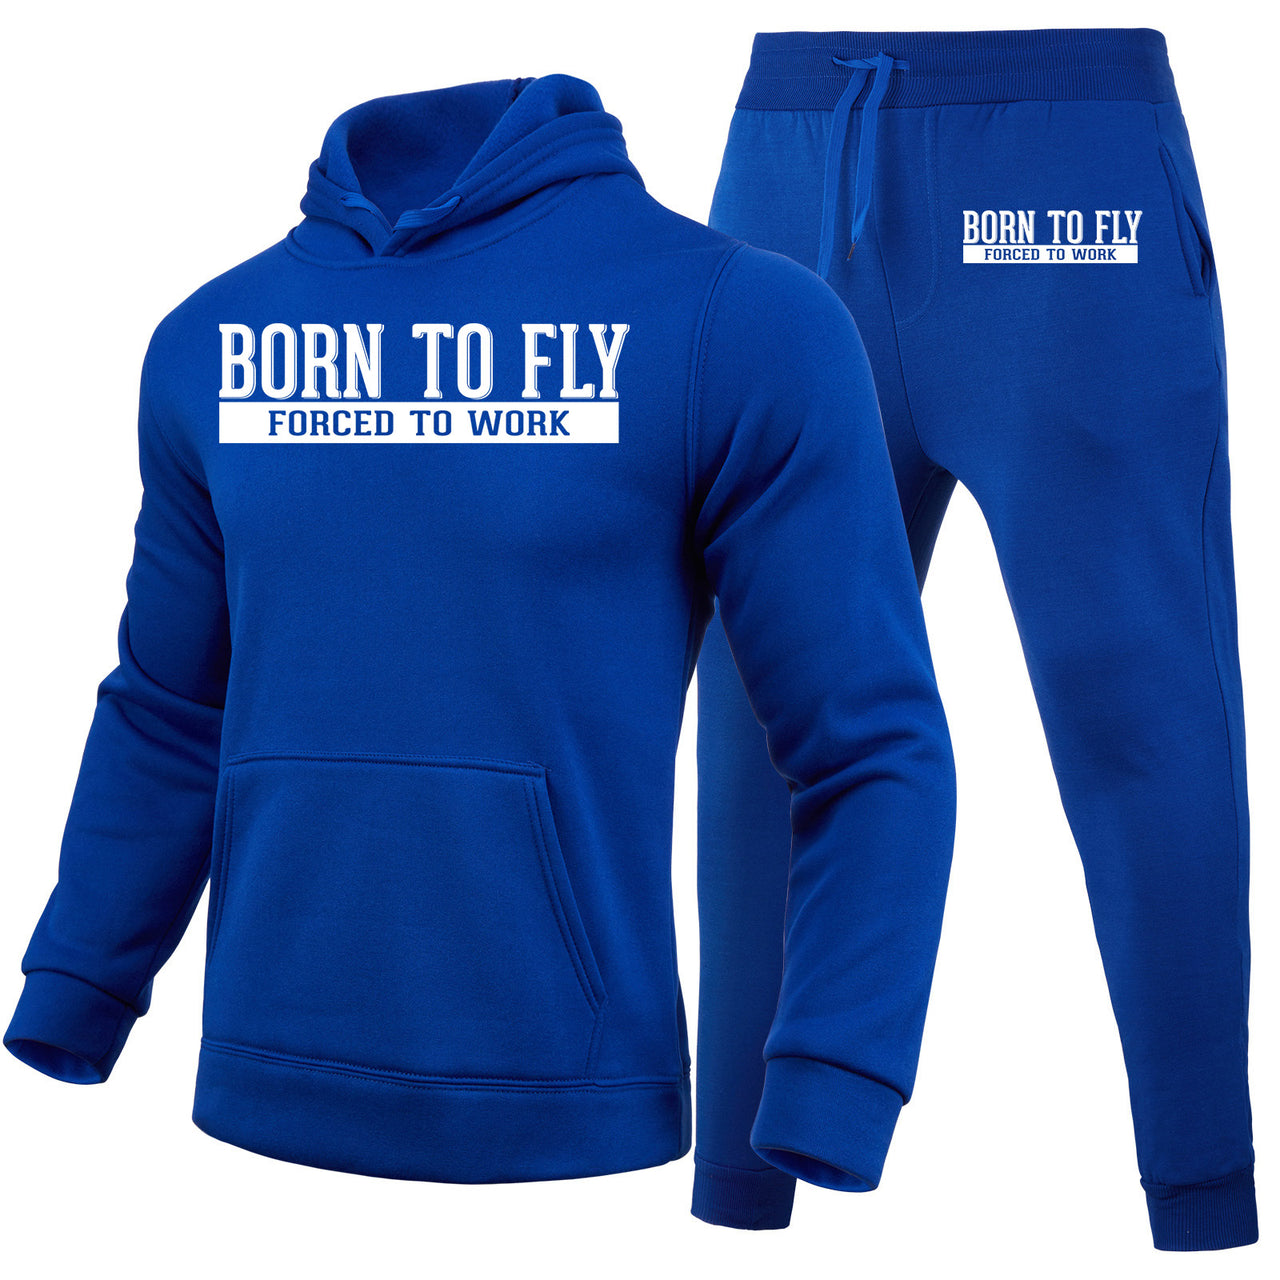 Born To Fly Forced To Work Designed Hoodies & Sweatpants Set